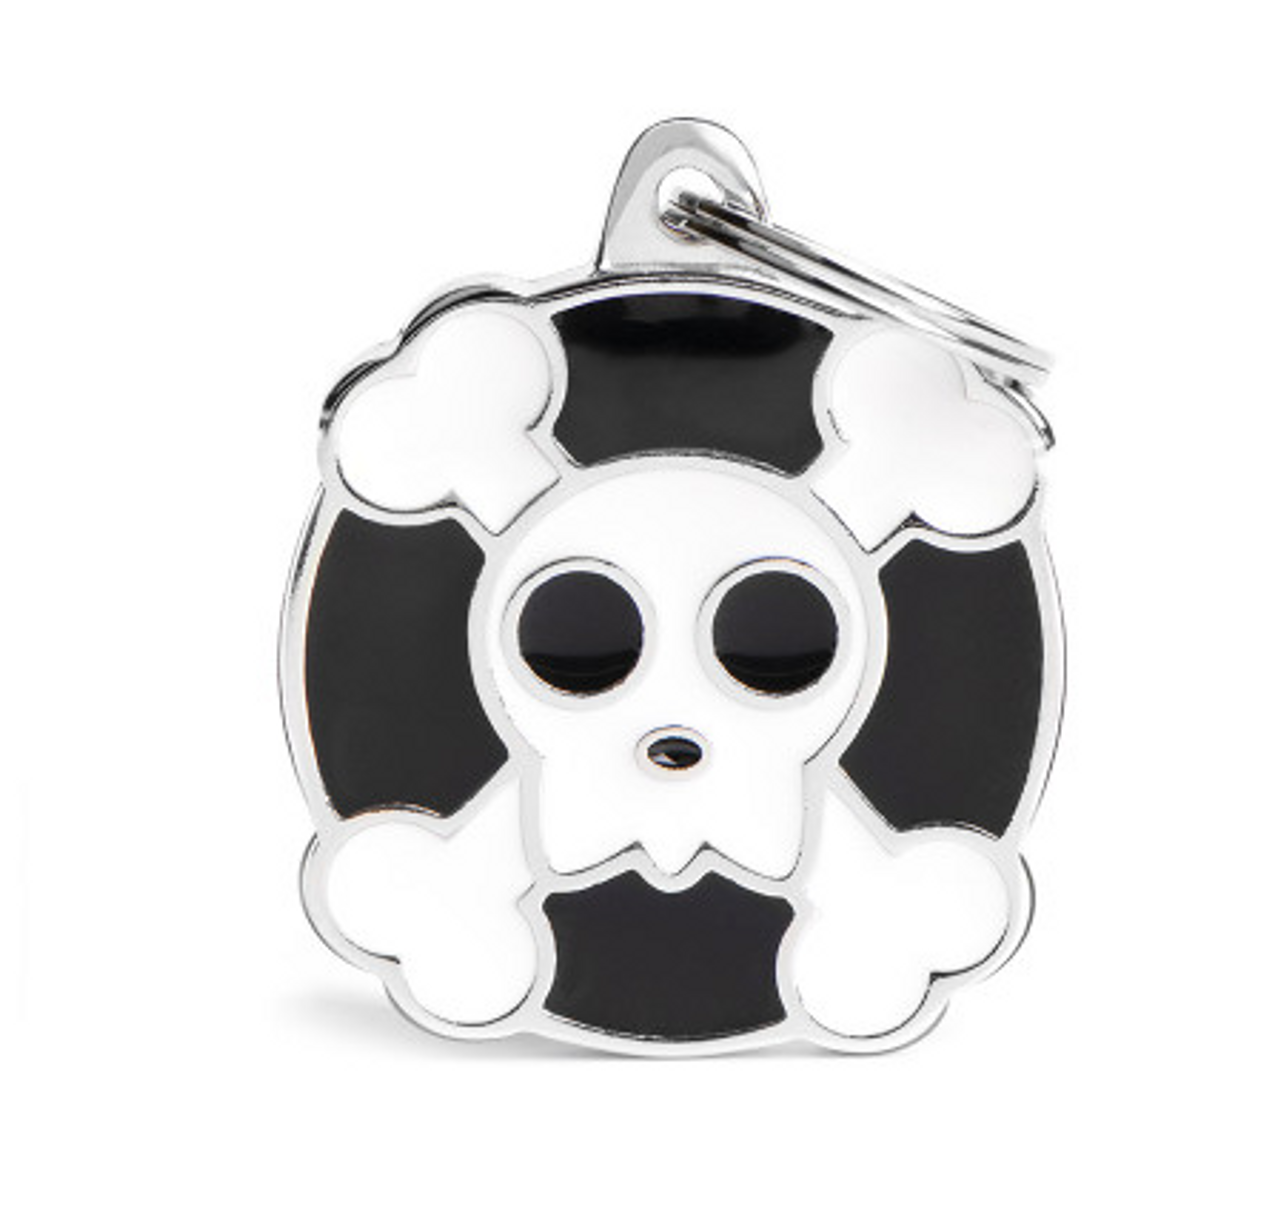 Skull and crossbones pet tags for dog or cat